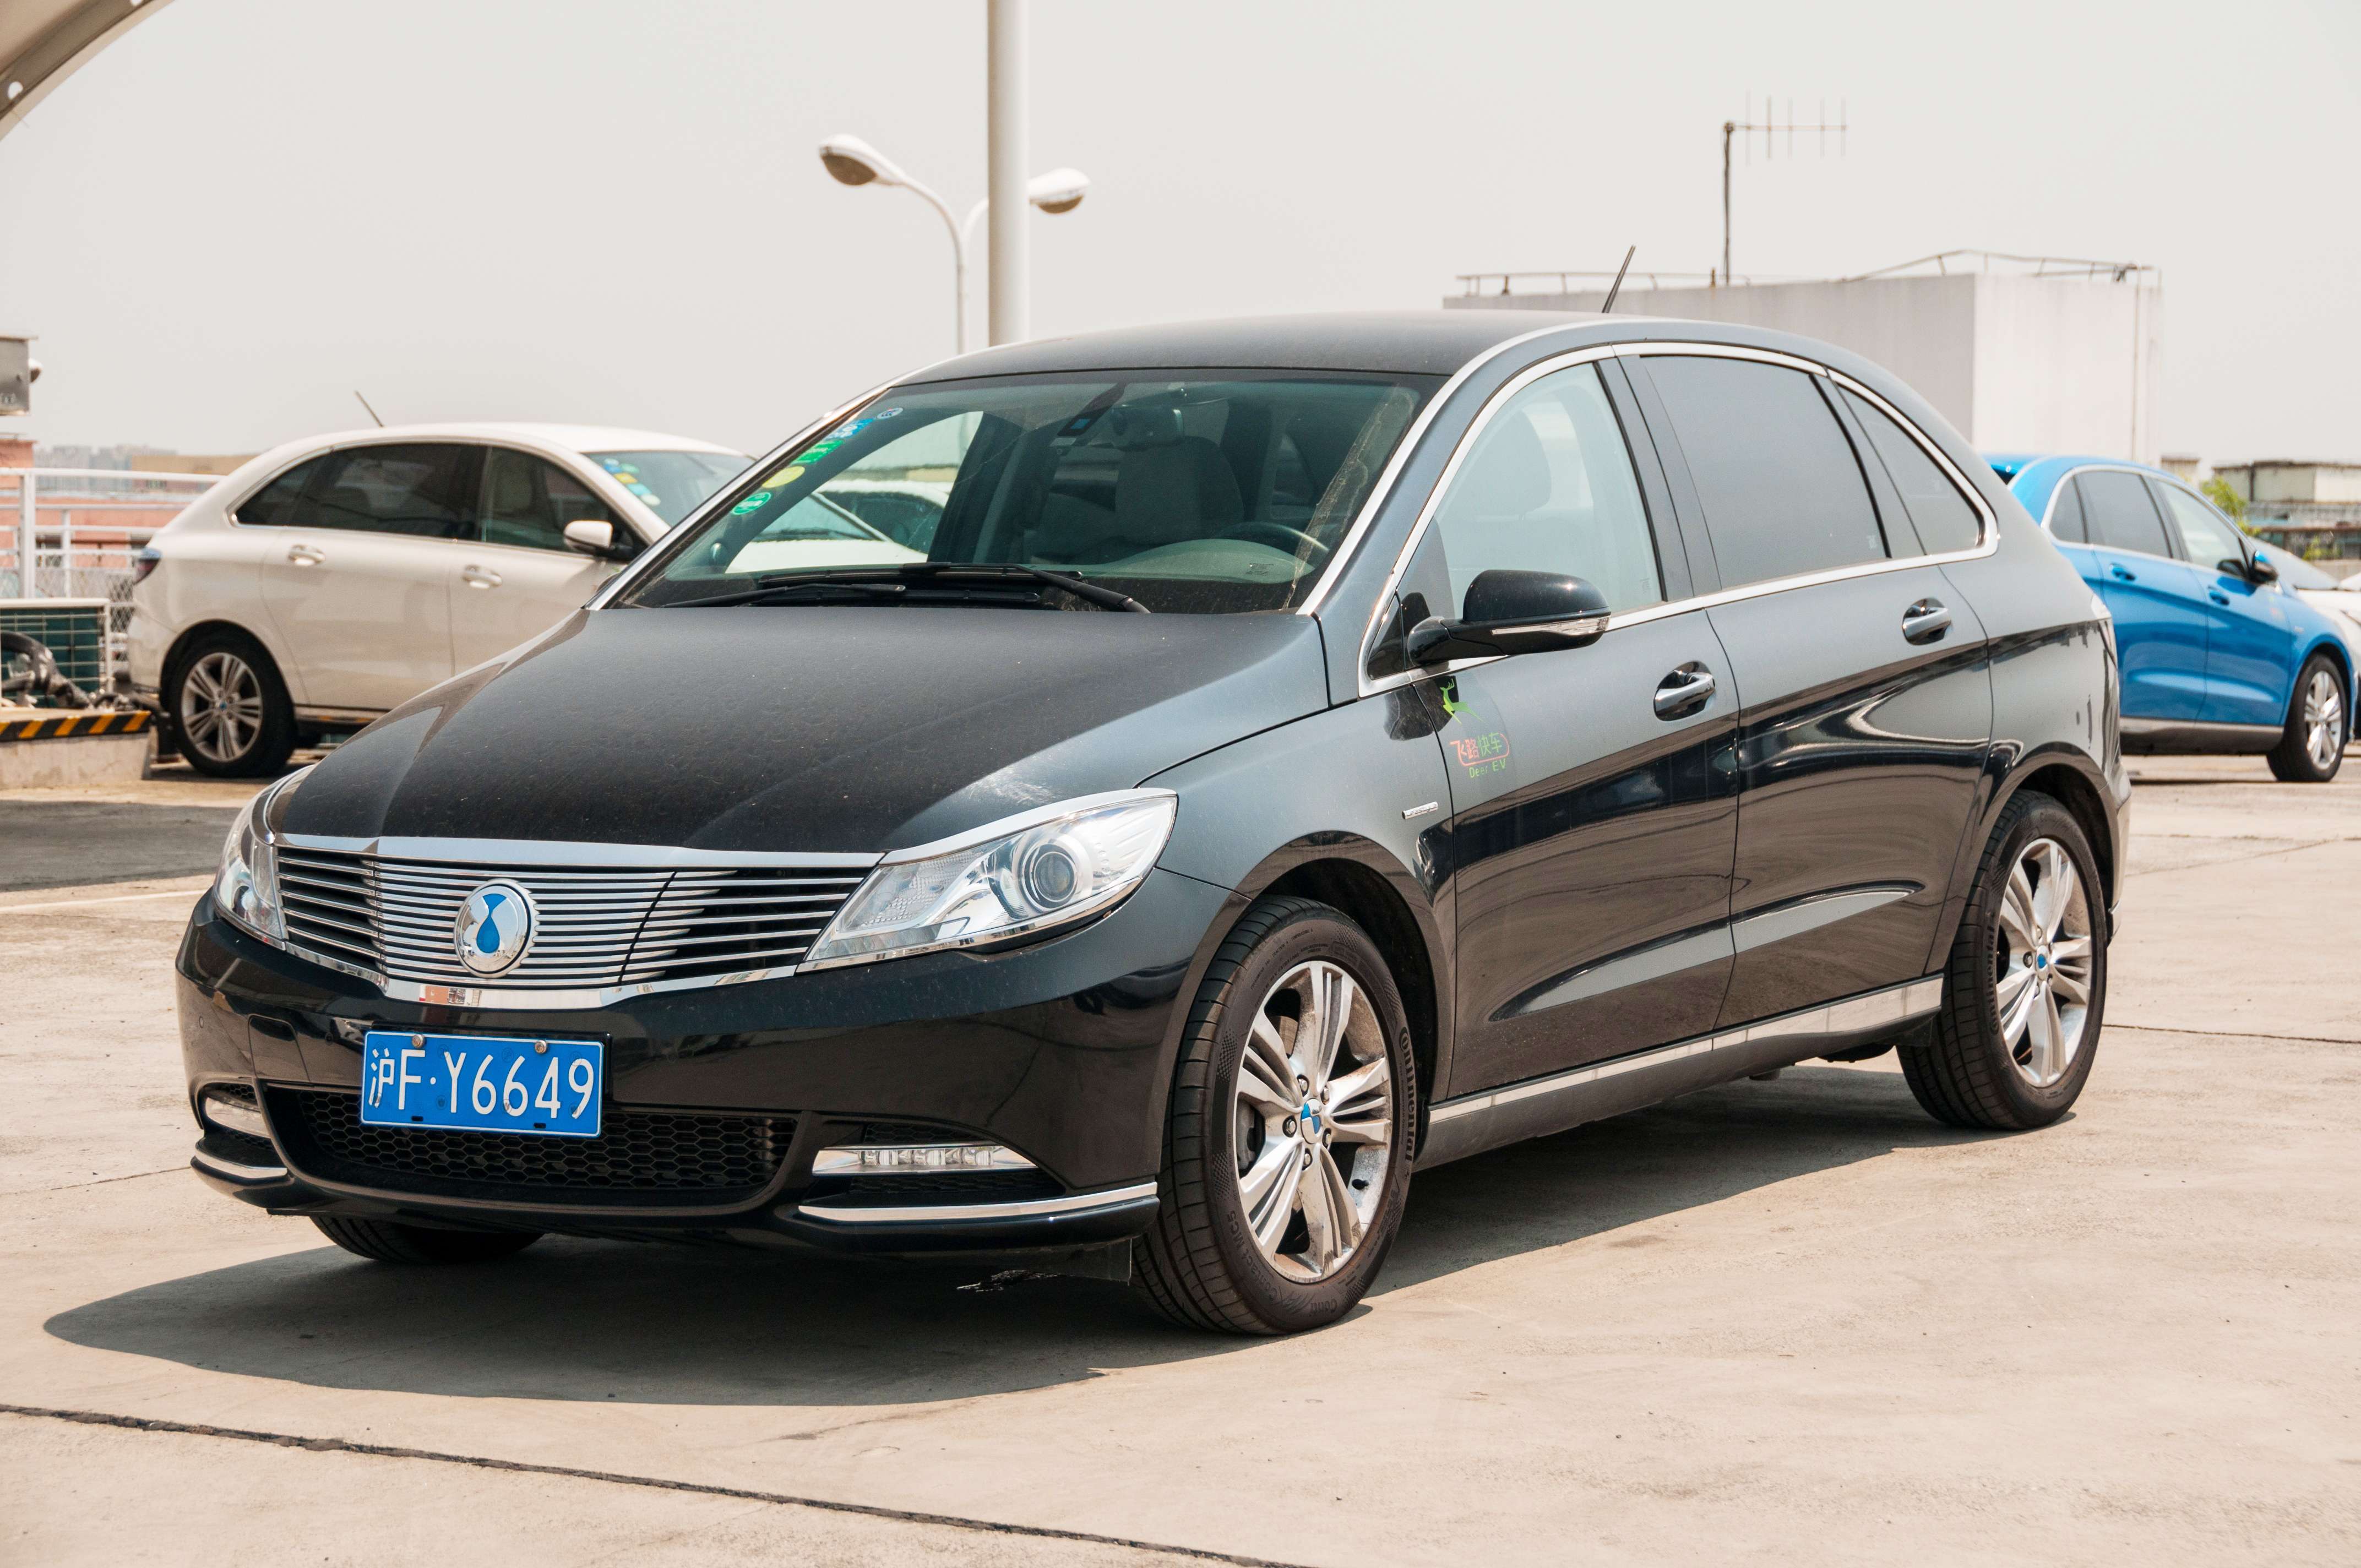 The Denza uses the drivetrain of the BYD e6 and matches it with the platform of the first generation Mercedes B-Class. Photo: Mark Andrews